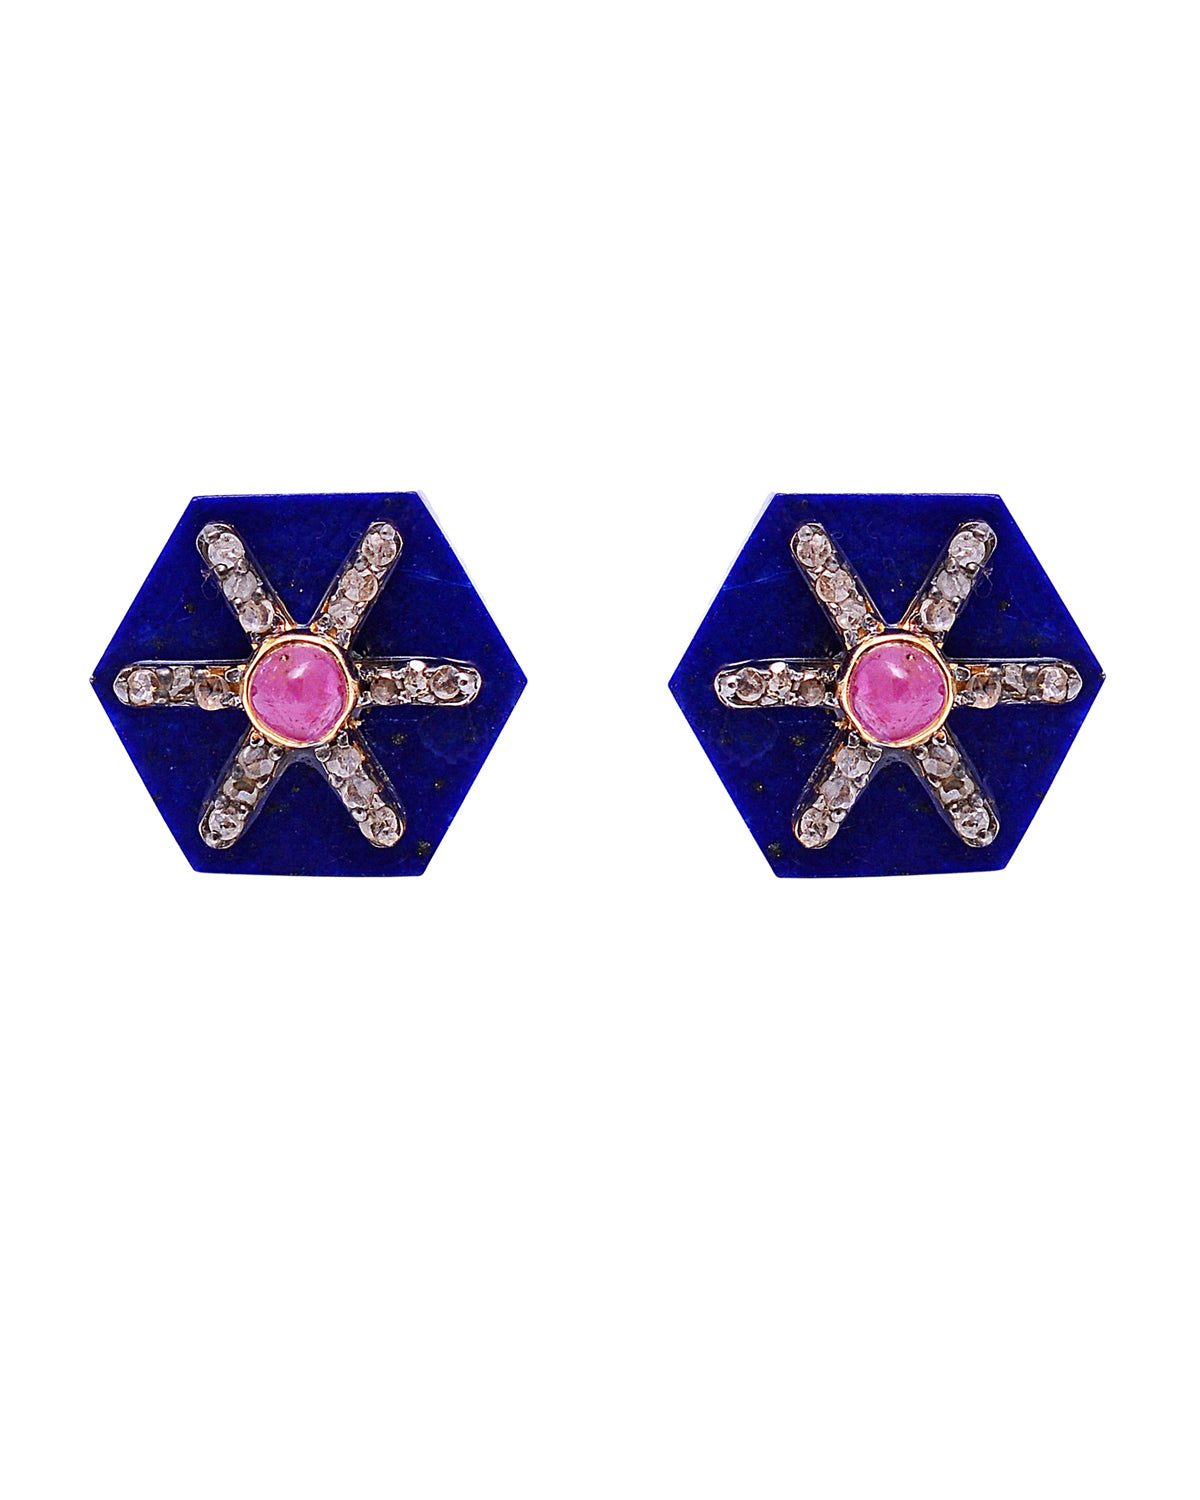 925 Silver Diamond Cufflinks with Ruby and Lapis